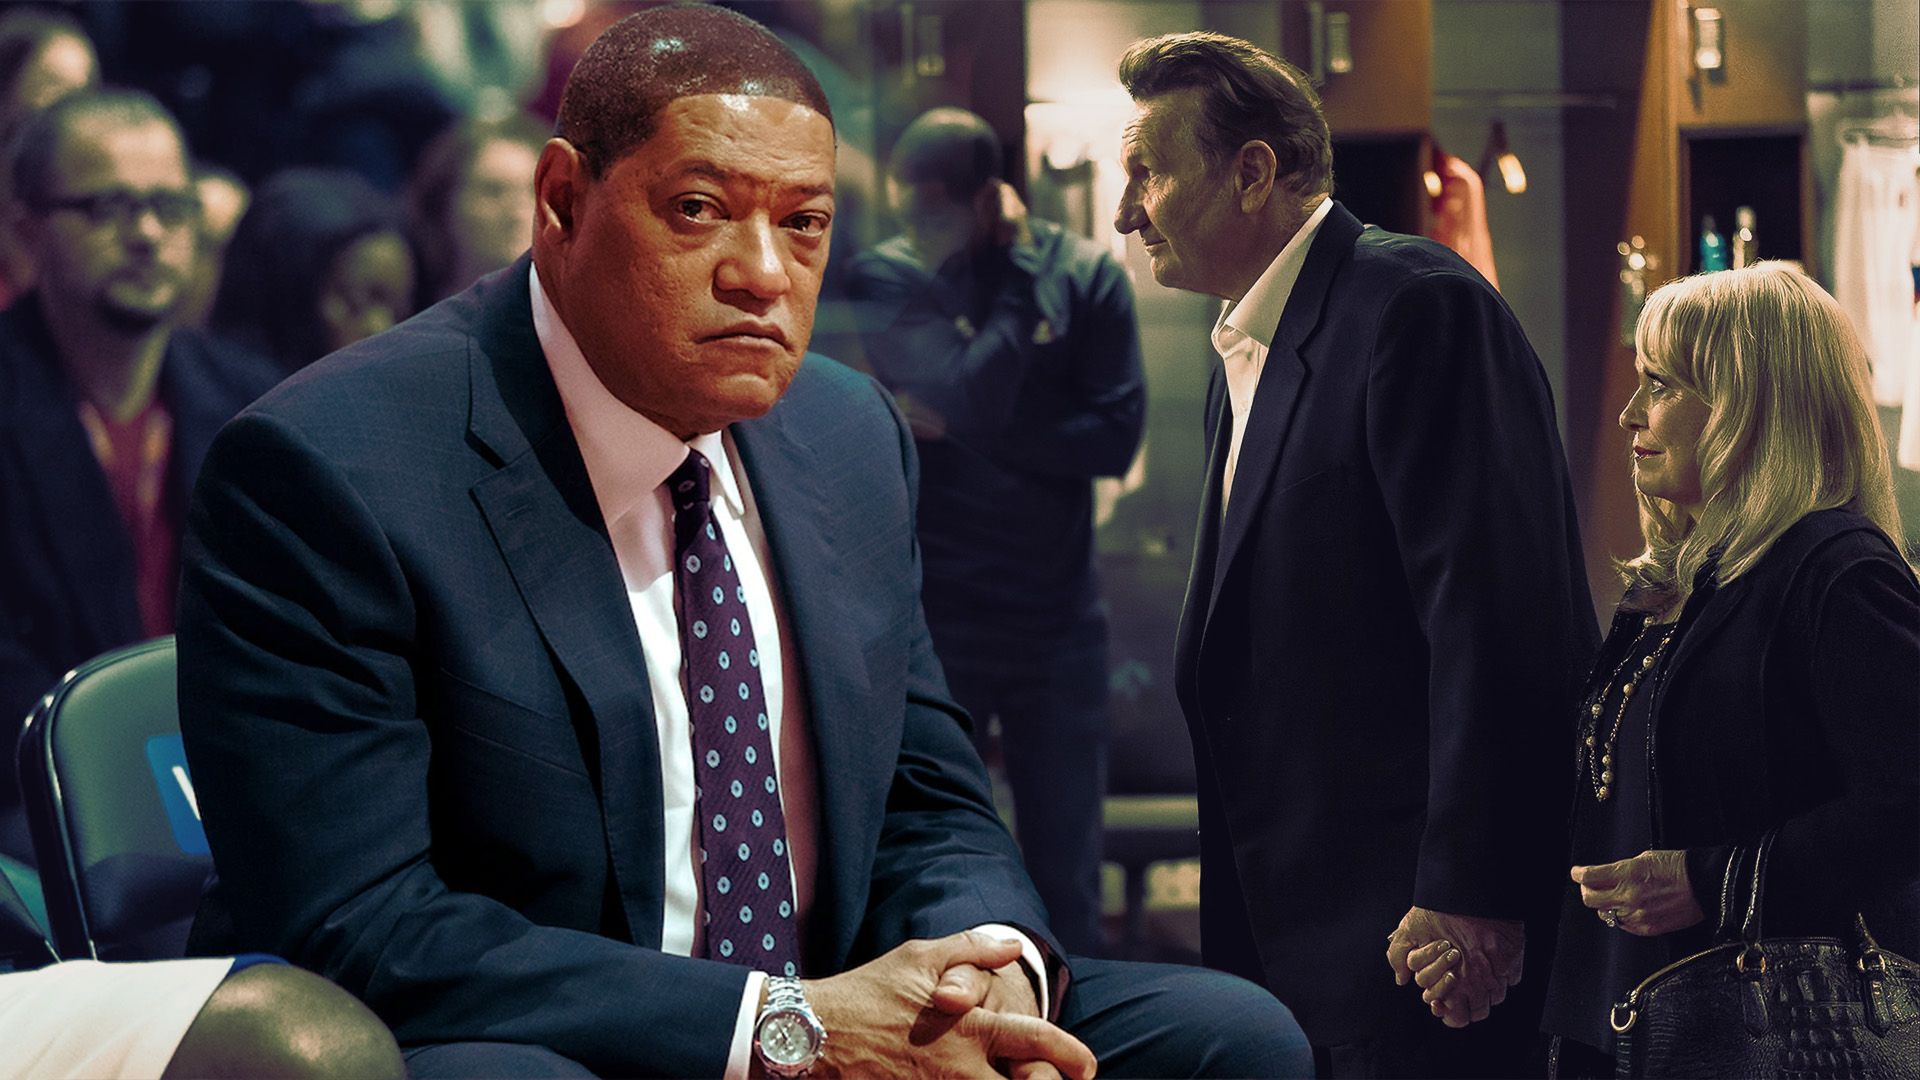 An edited image of Laurence Fishburne in a suit and tie as Doc Rivers in Clipped